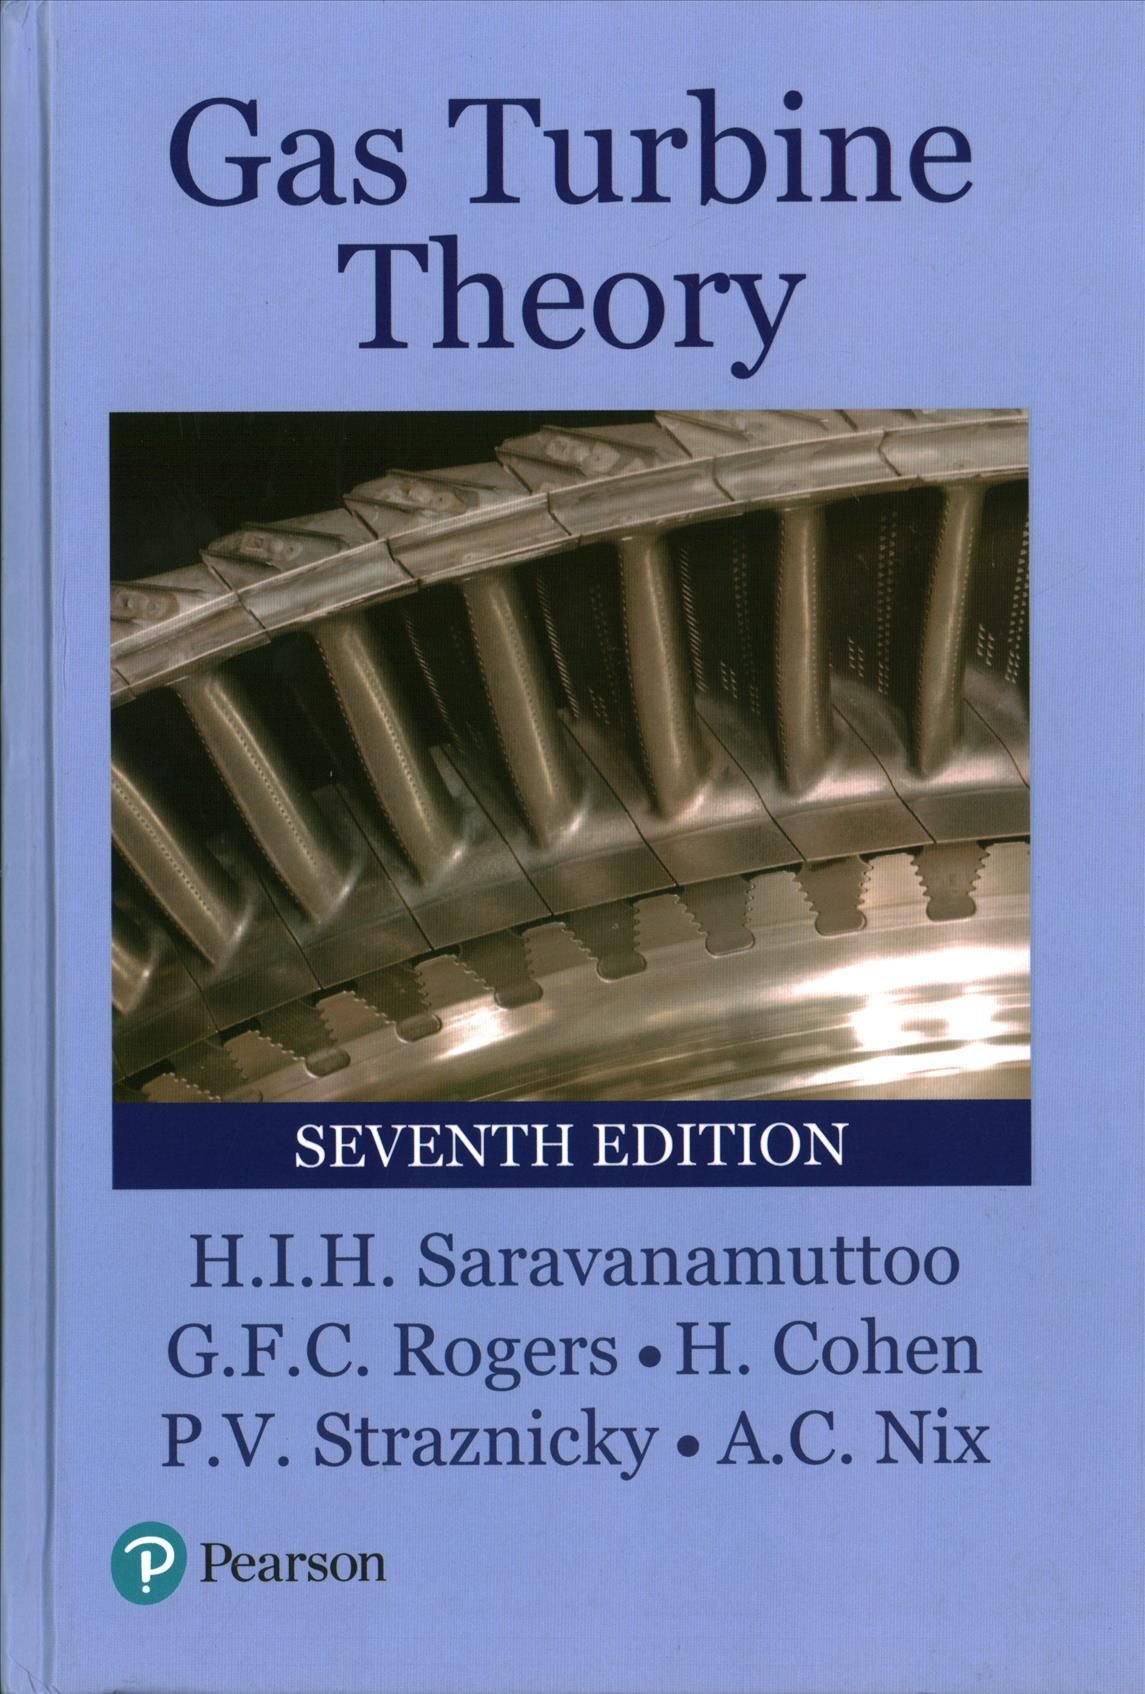 Gas turbine theory fourth edition character builder